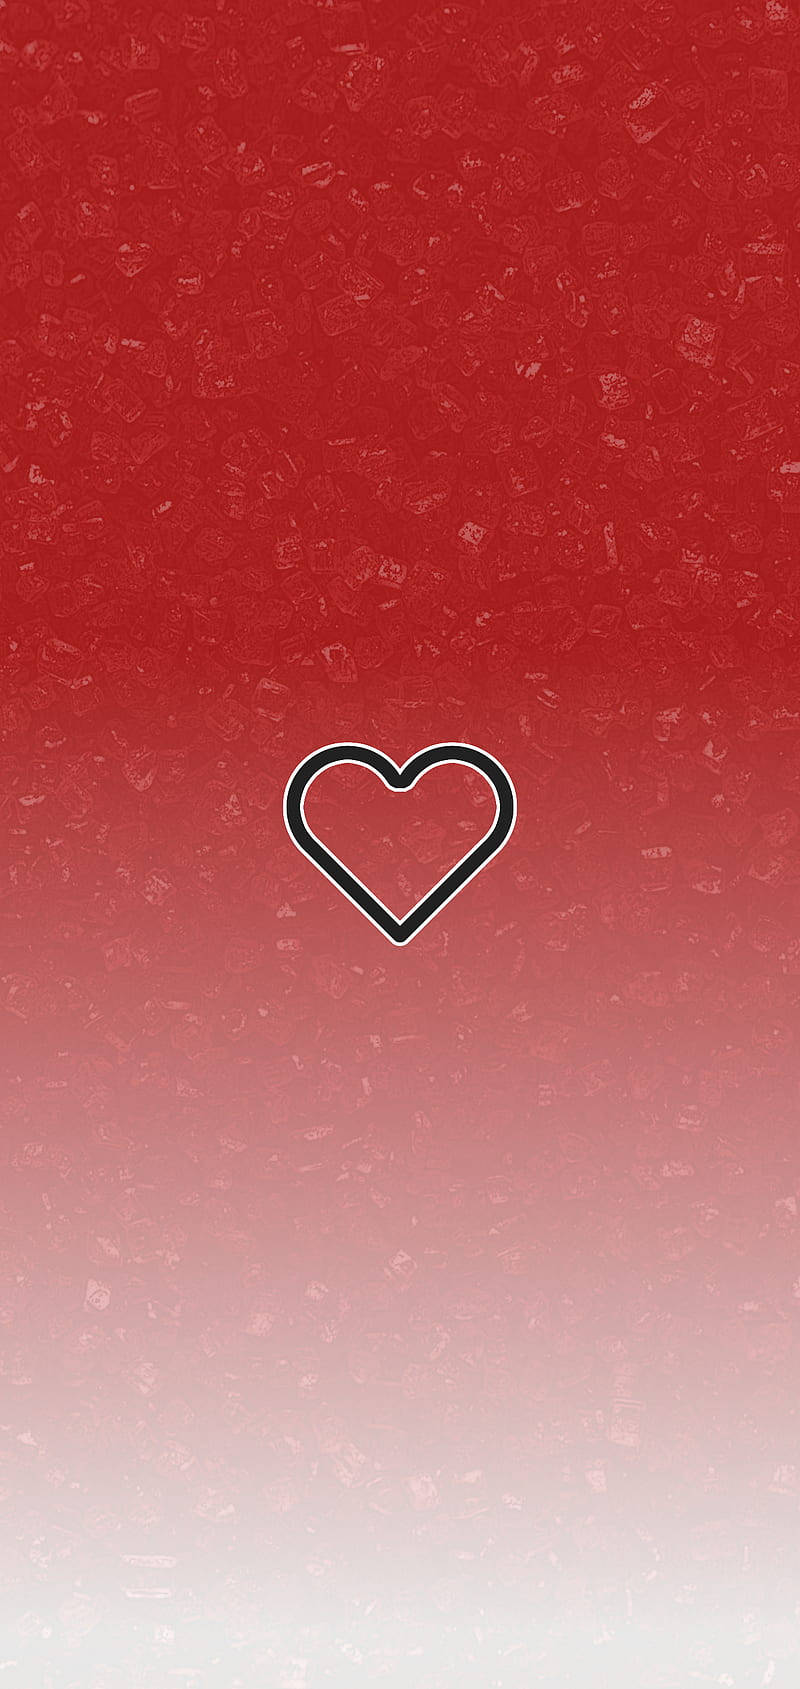 Cute Instagram Heart On Red Background